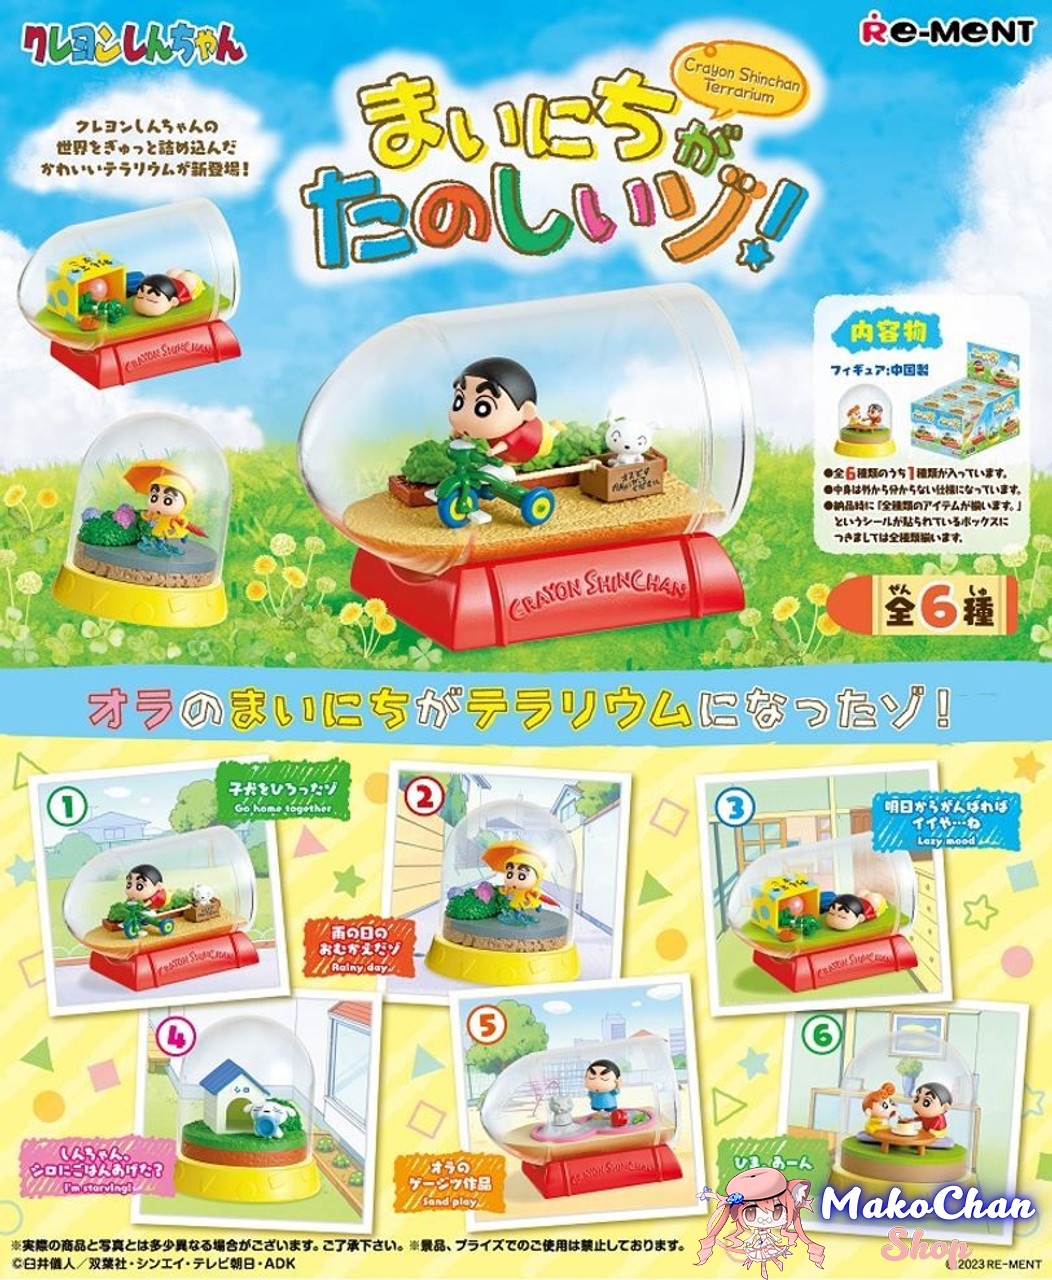 Re-ment Crayon Shin-chan Exciting Days ( pre-order)